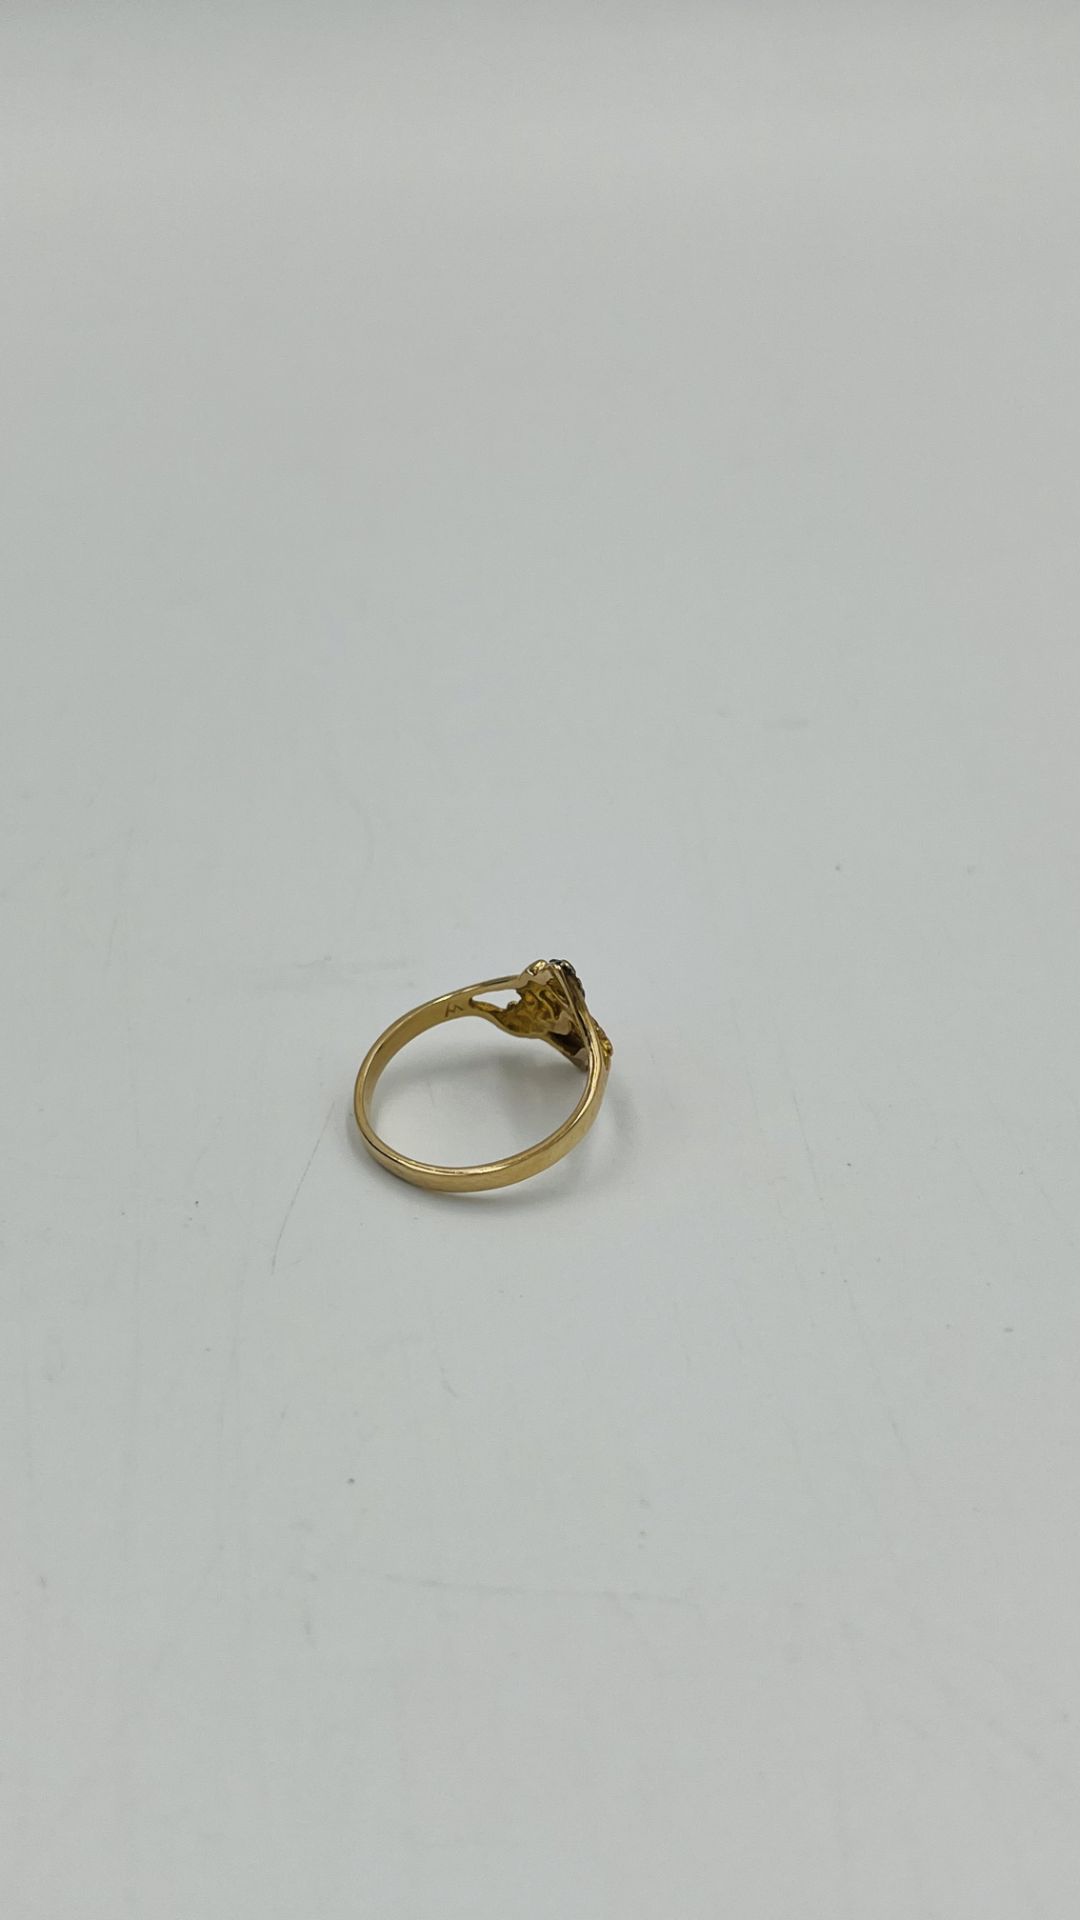 10ct gold ring together with a matching pair of 10ct gold earrings - Image 4 of 6